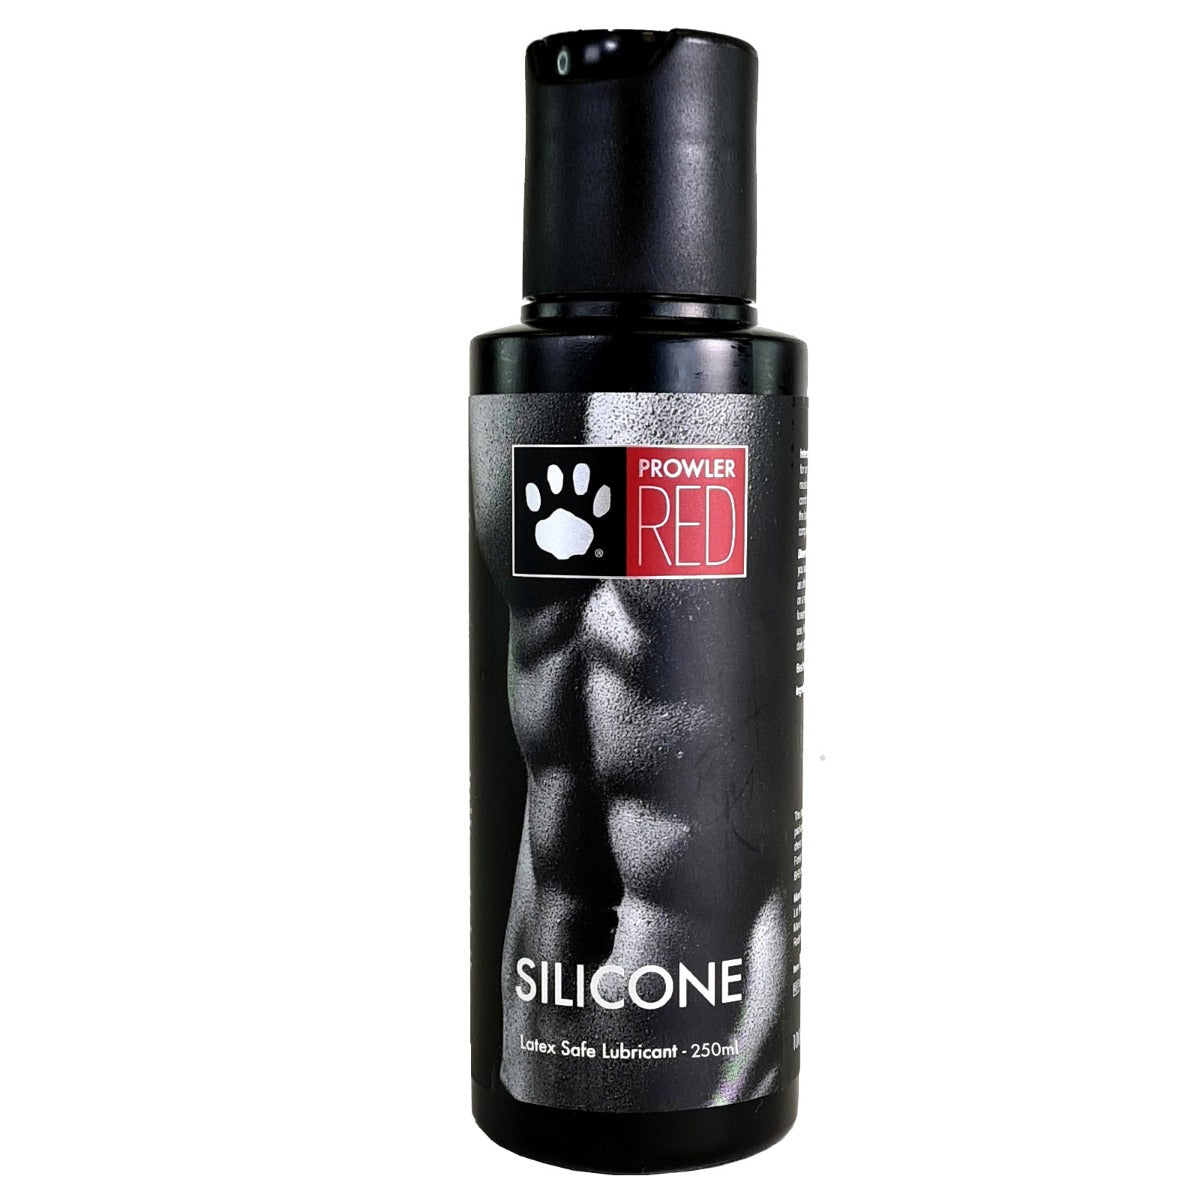 Prowler RED Silicone Lube 250ml